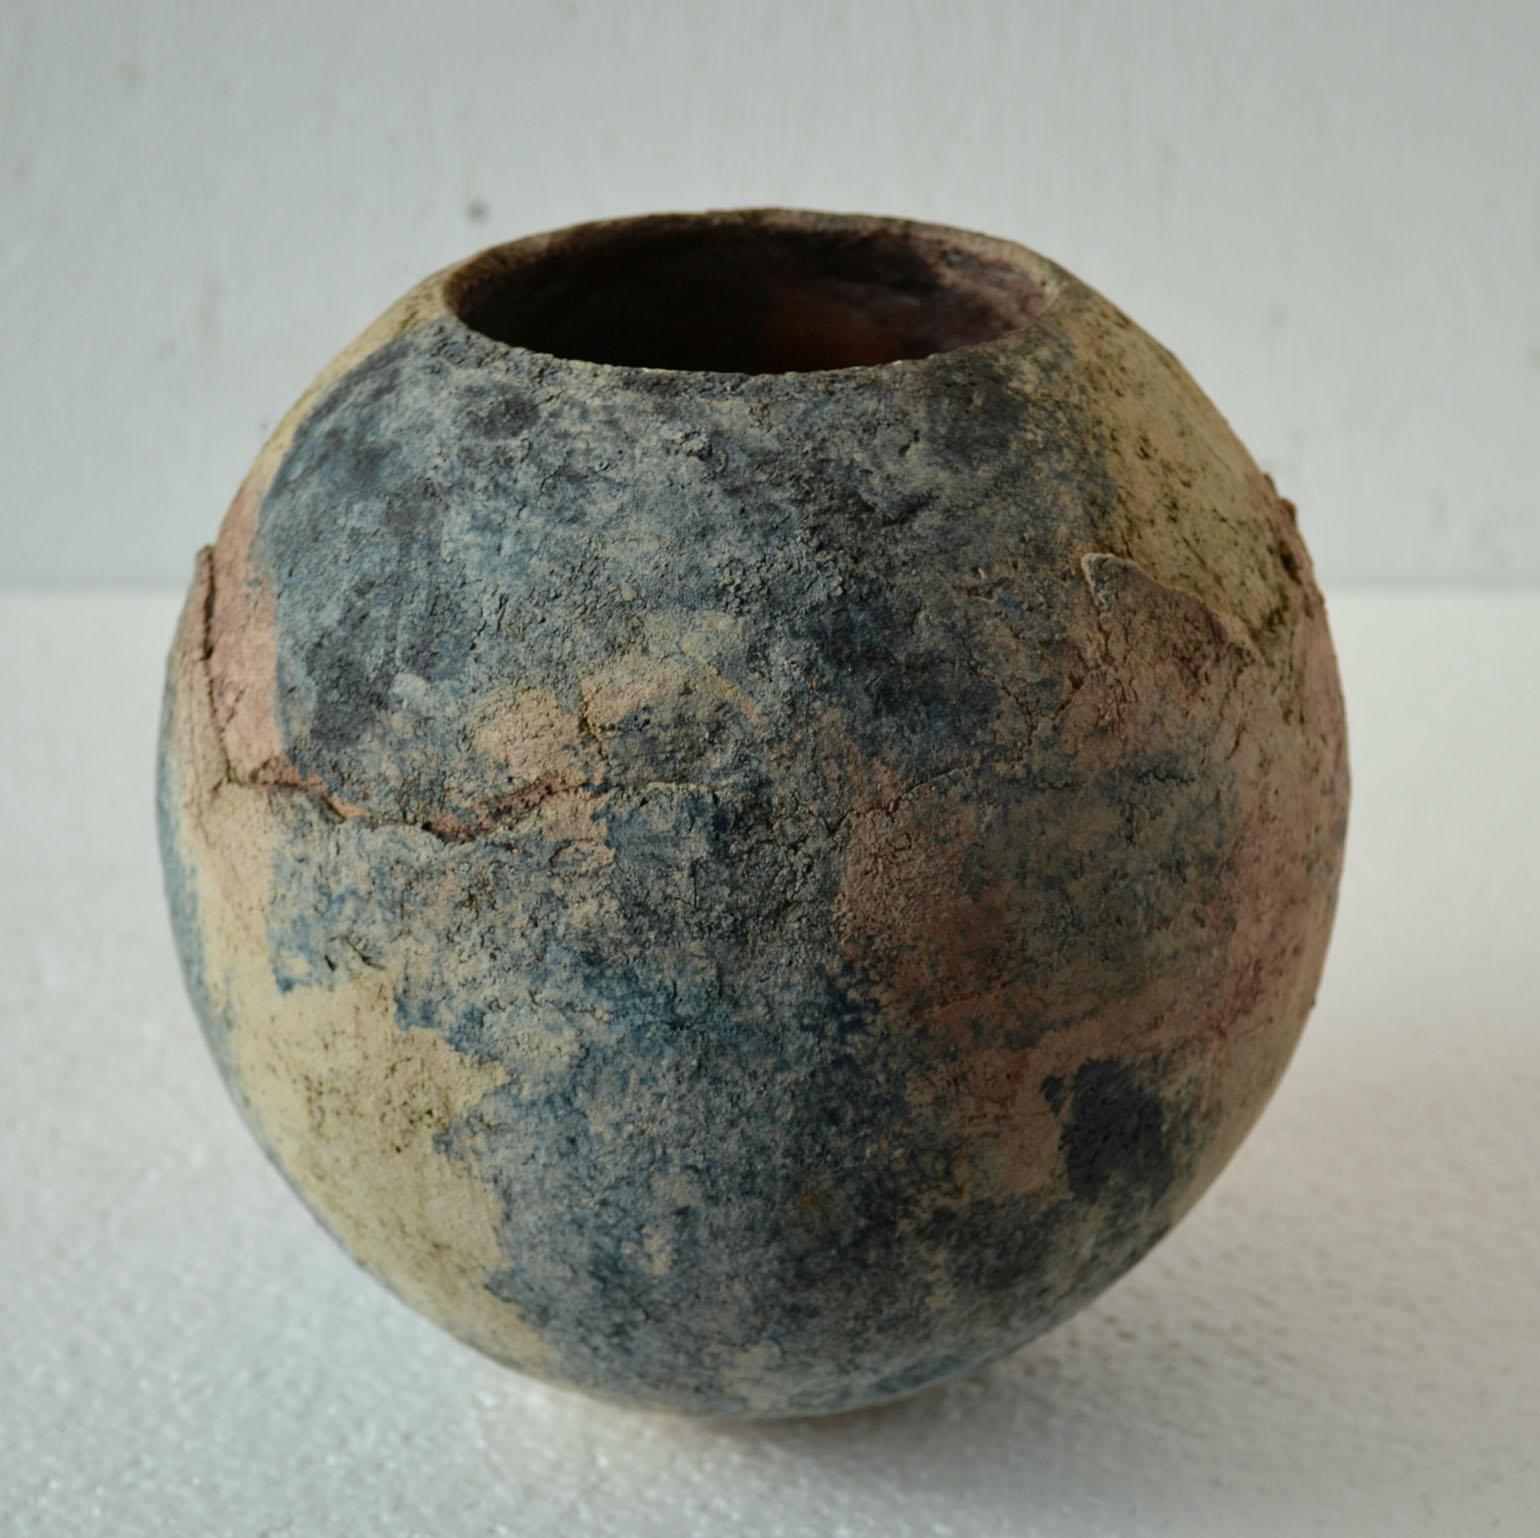 Decorative Ball Shape Textured Studio Vase in Earth Tones In Excellent Condition For Sale In London, GB